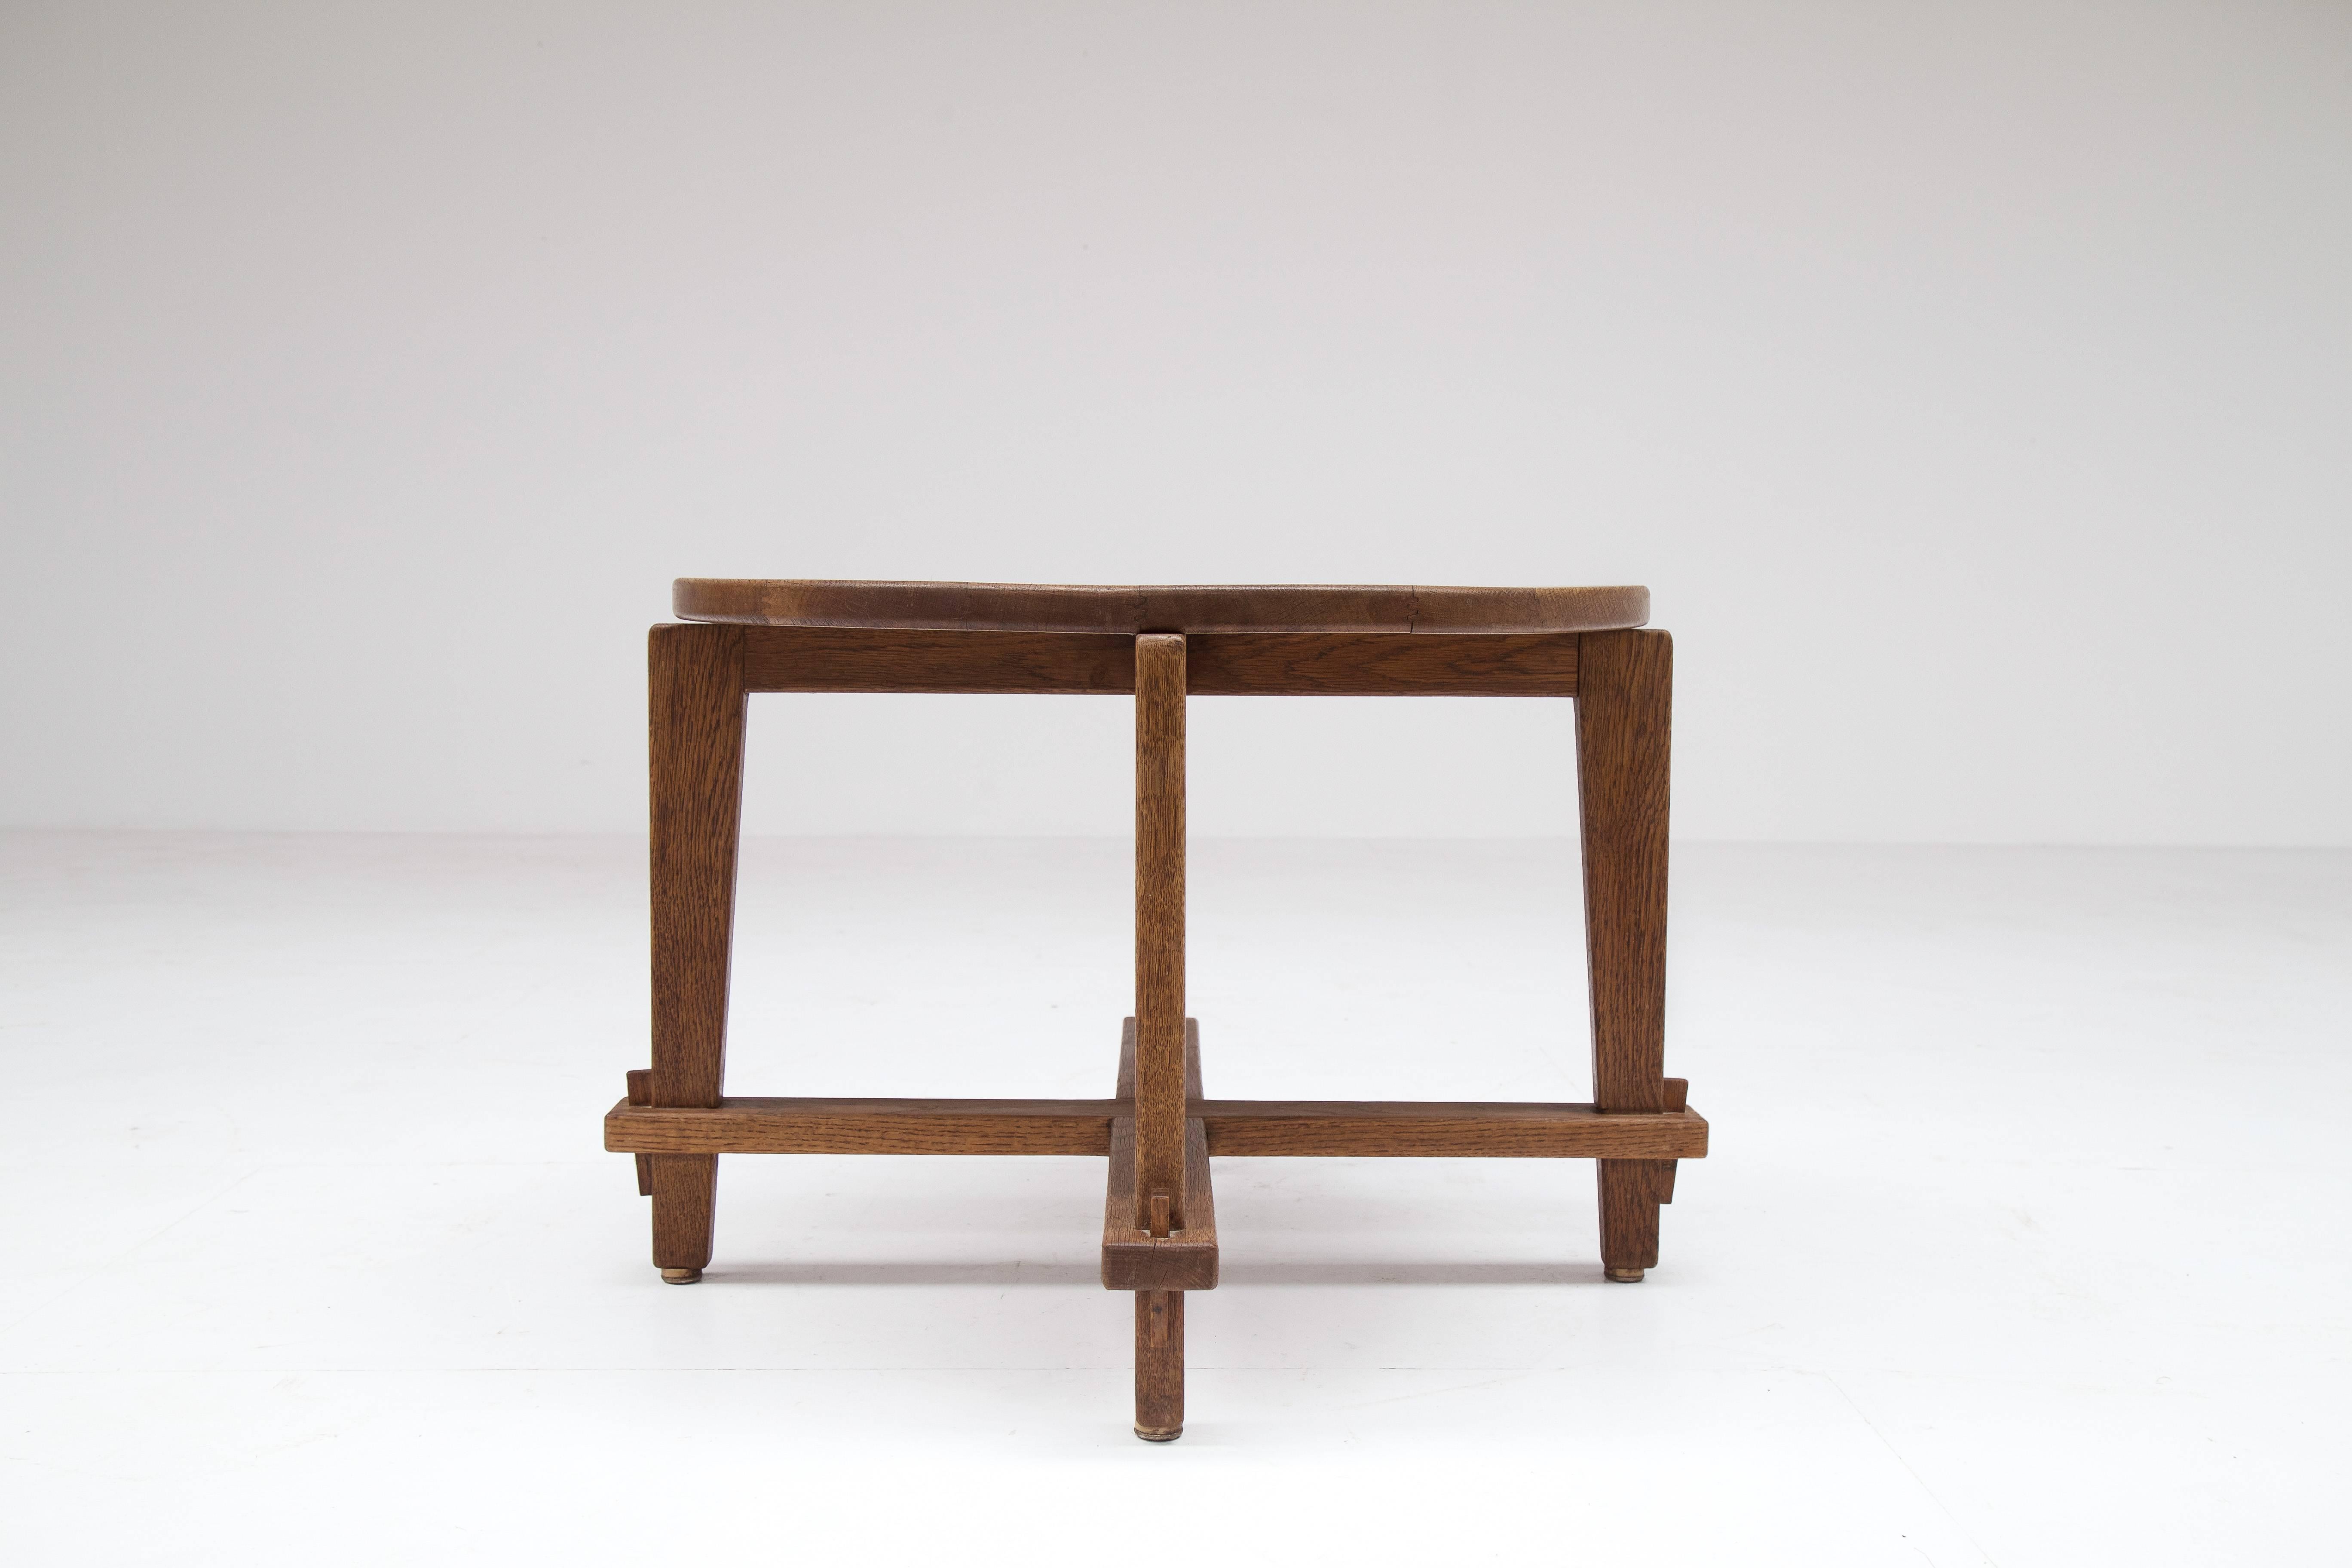 Interesting side table from the former 'Hotel Des Nations' in Knokke, 1930s, Belgium.

Made in oakwood with inserted butterfly joints in wenge wood. A nice example of good woodwork, for this solid looking side table.

